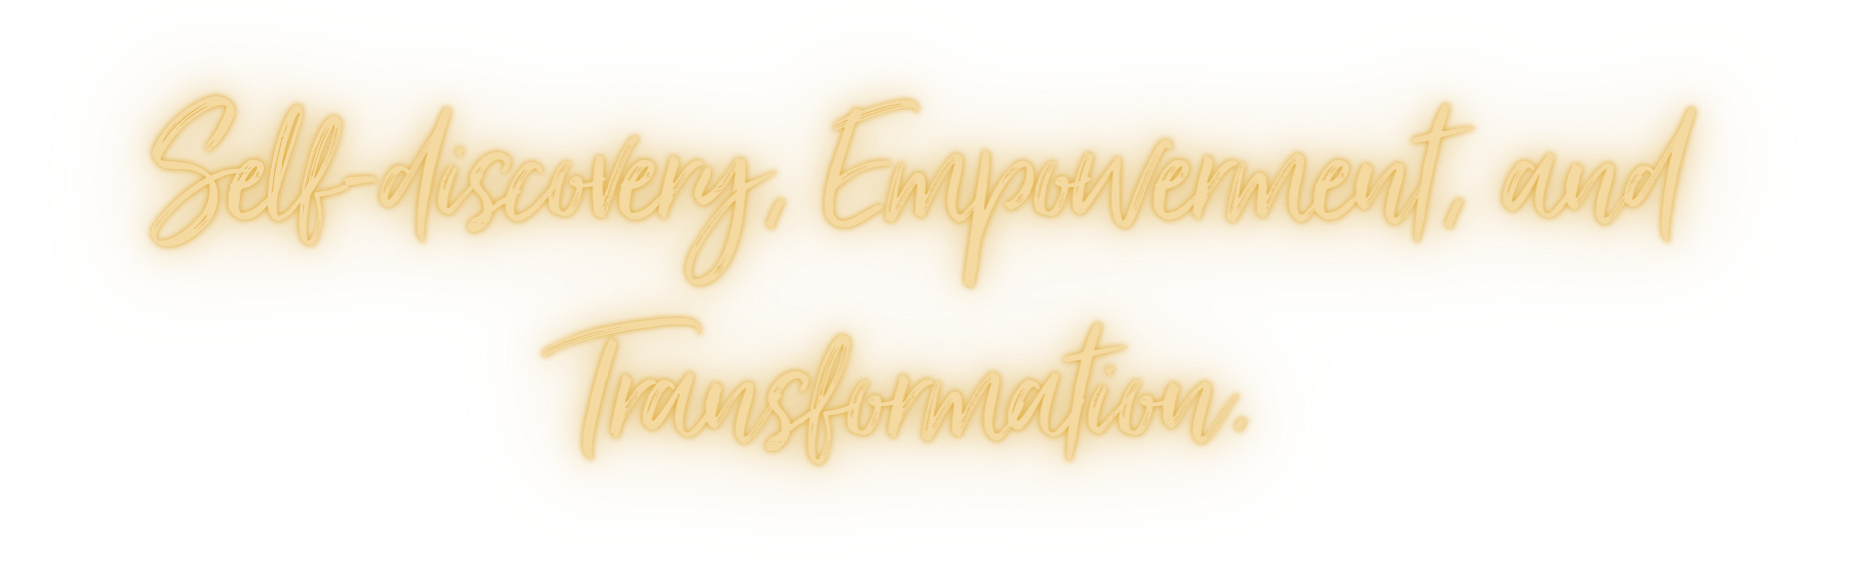 Self-discovery, Empowerment, and Transformation Title